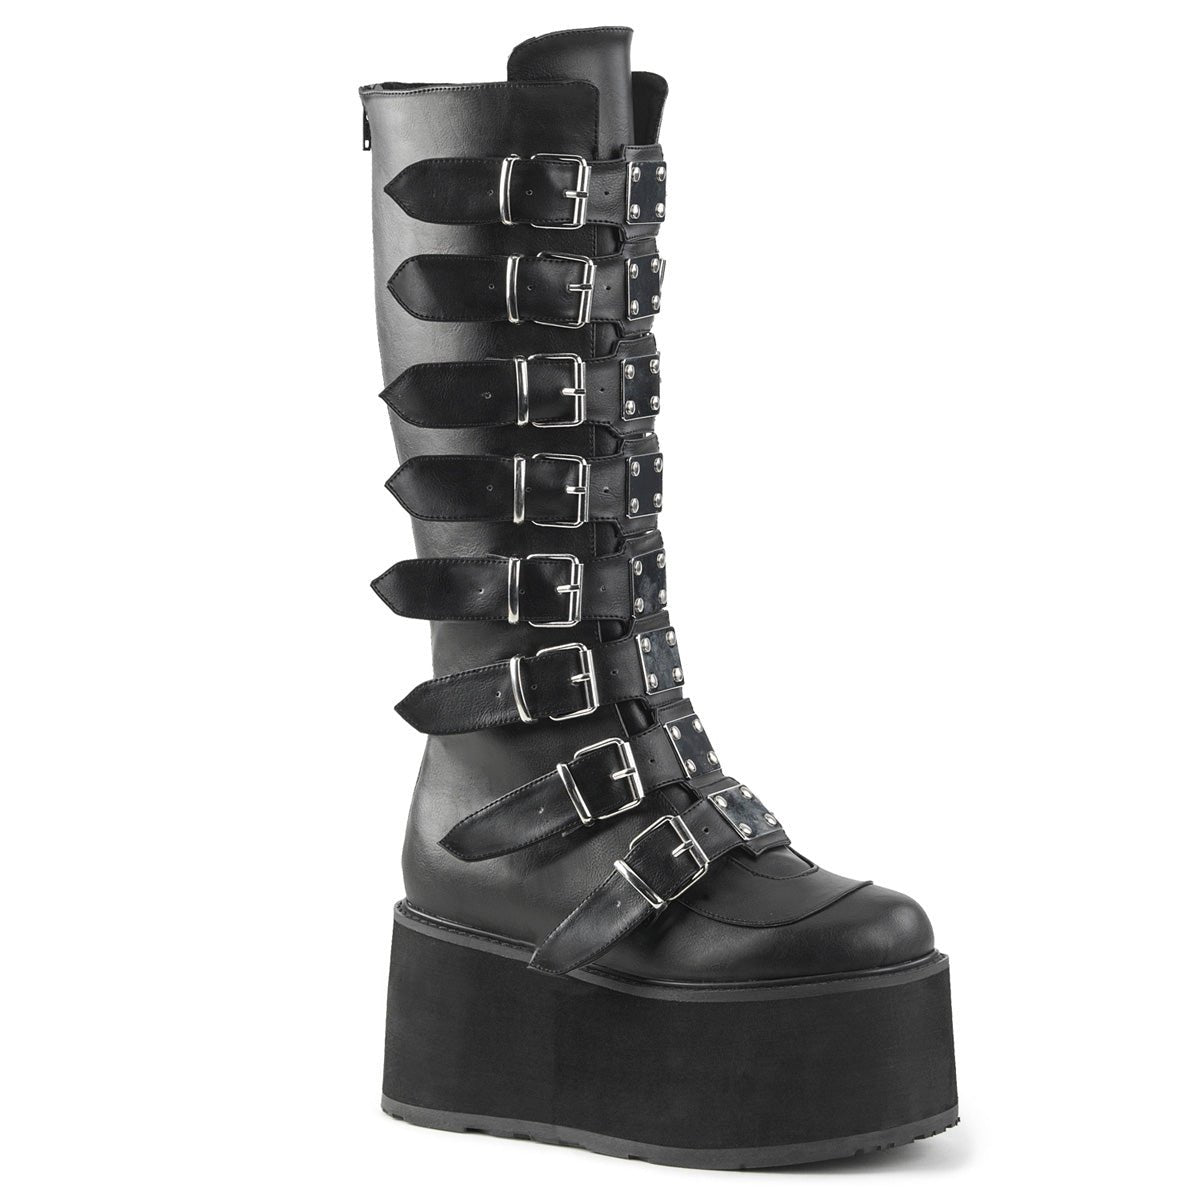 Too Fast | Demonia DAMNED-318 Black Vegan Leather, 3 1/2" PF Ankle Boots